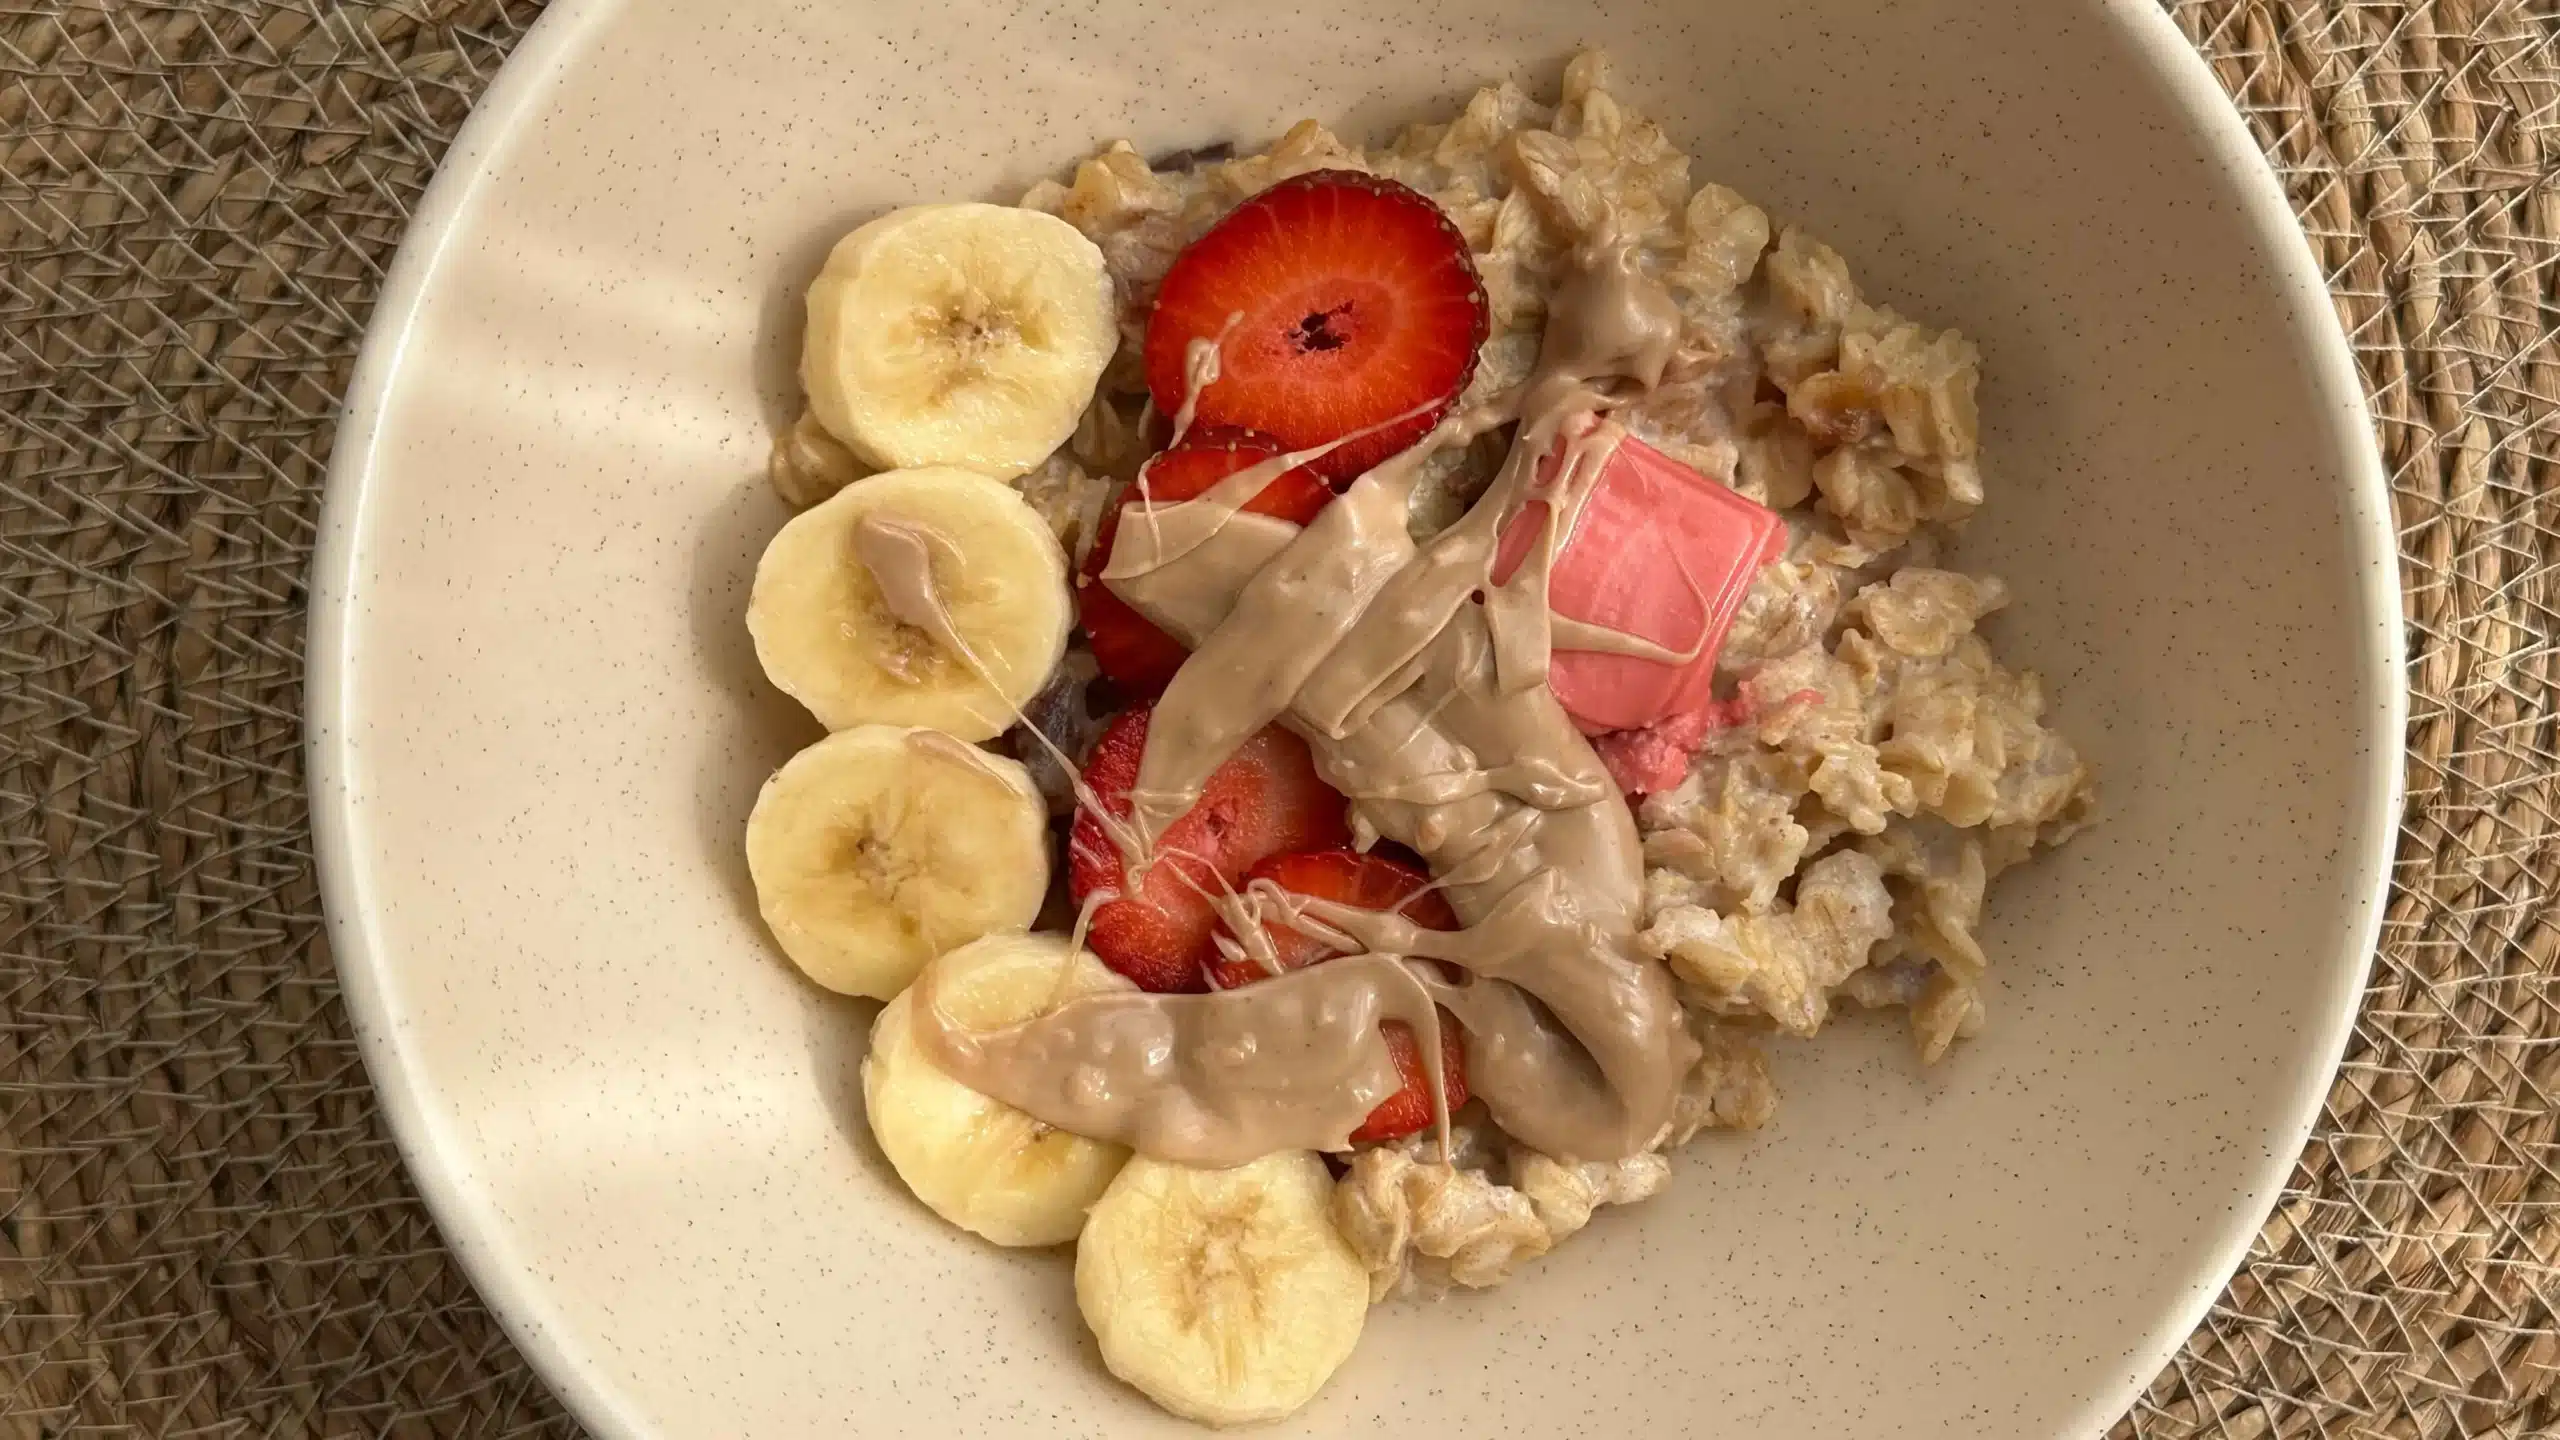 Strawberry Oatmeal / Healthy & Super Quick